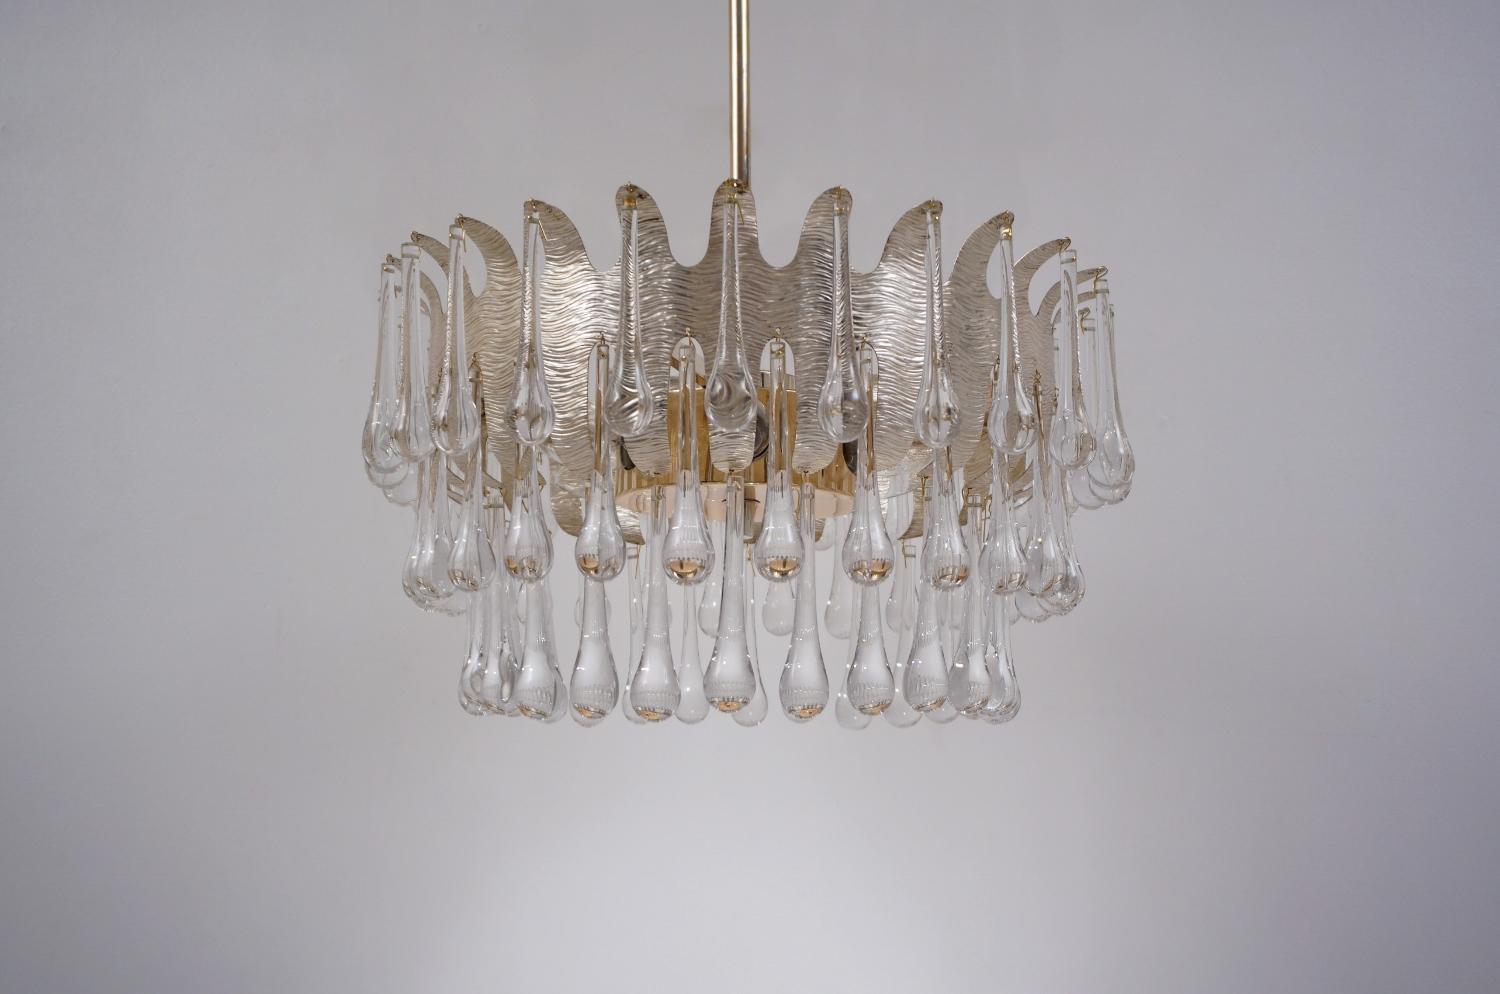 Palwa, silver plated frame with 78 crystals, possibly by Ernst Palme, 1960s, German.

This chandelier has been thoroughly cleaned respecting the vintage patina. Newly rewired & earthed with gold silk cable, in full working order & ready to